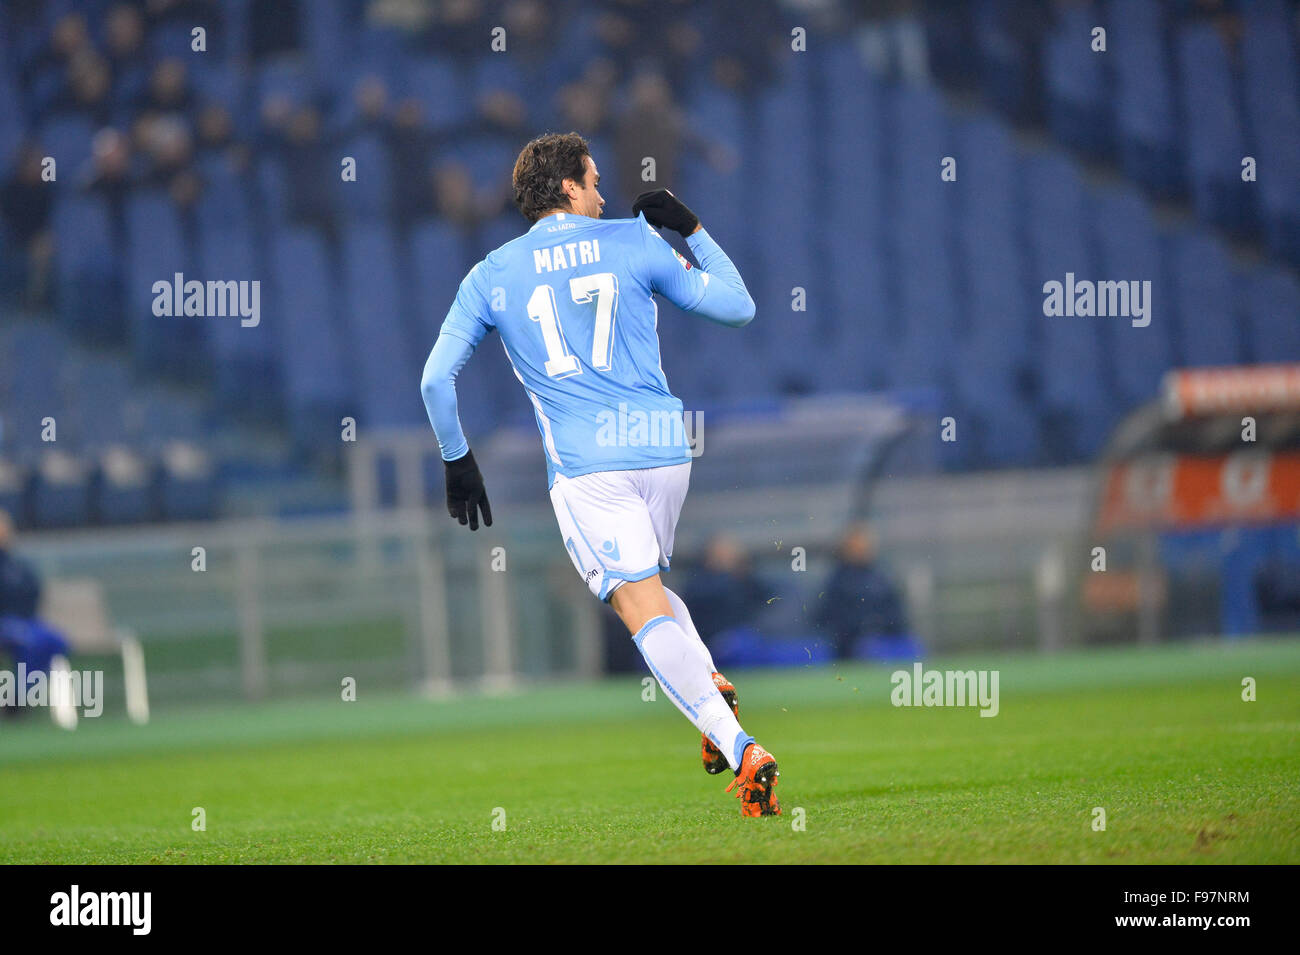 Rome, Italy. 14th December, 2015. Alessandro Matri celebrates after scoring a goal 1-0 with teammates during the Italian Serie A football match S.S. Lazio vs U.C. Sampdoria at the Olympic Stadium in Rome, on December 14, 2015. Stock Photo